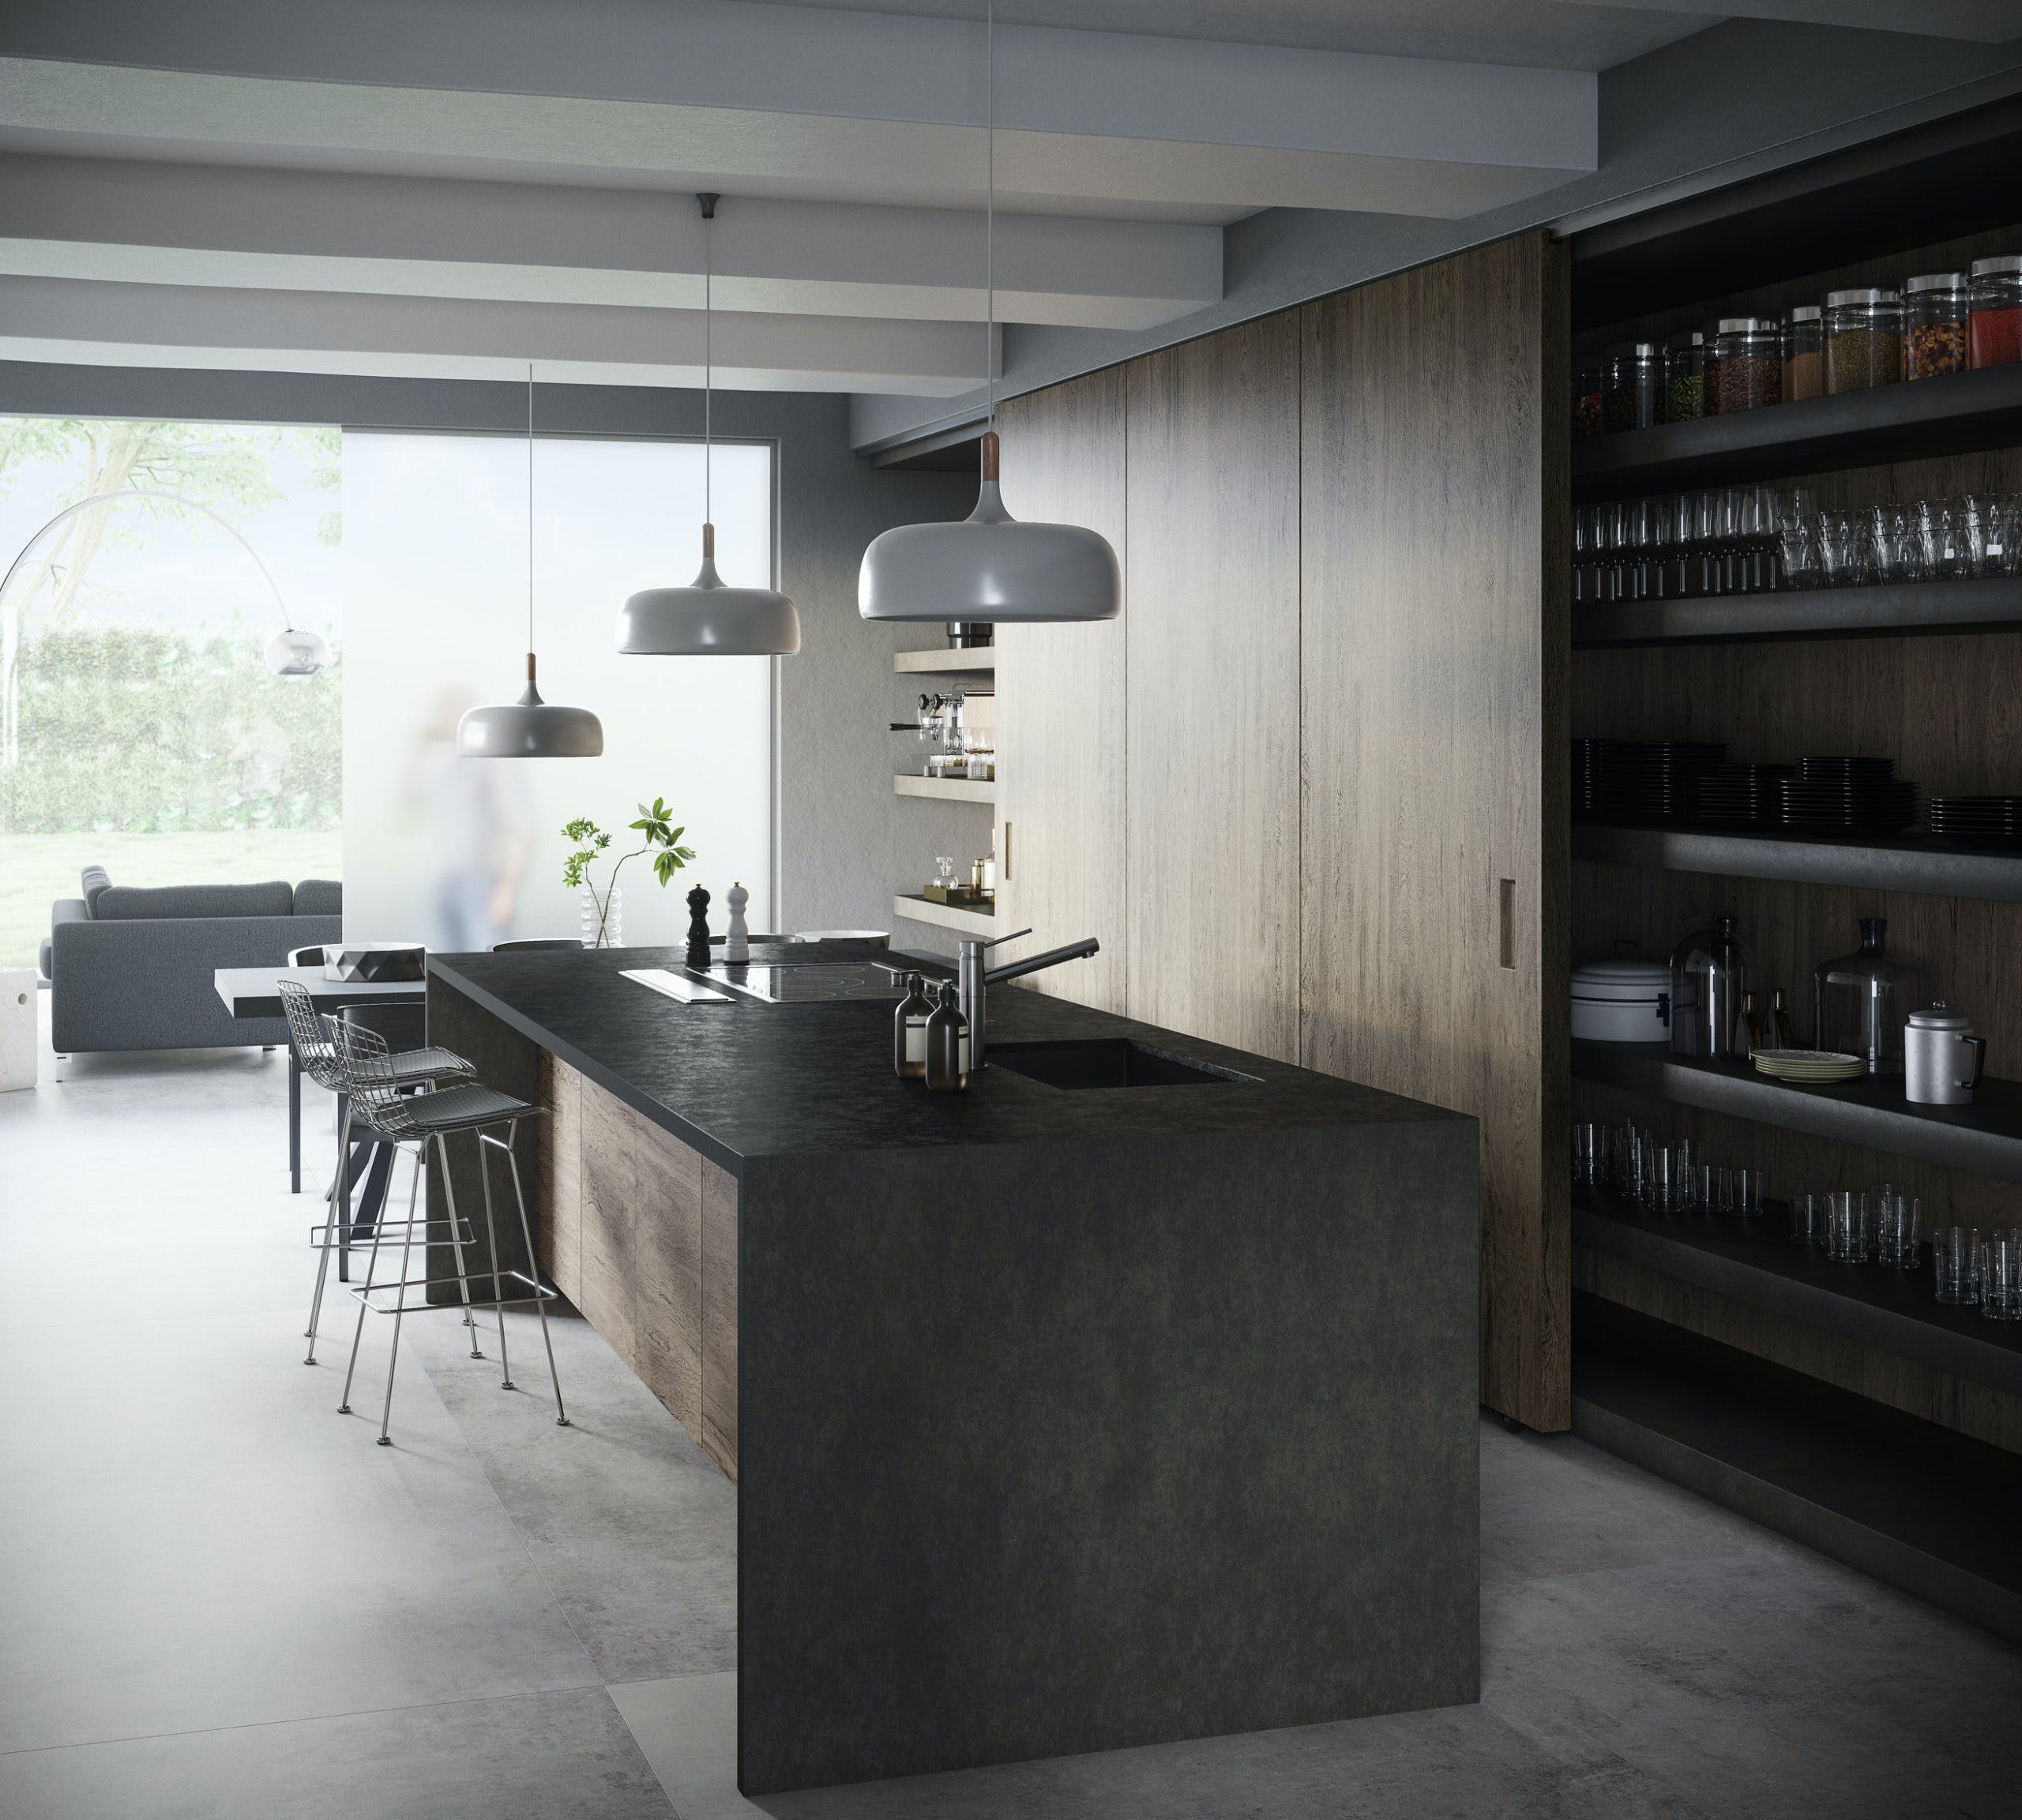 Image of Dekton Kitchen Milar Resized 1 scaled 1 in How to organise your kitchen and keep it that way - Cosentino